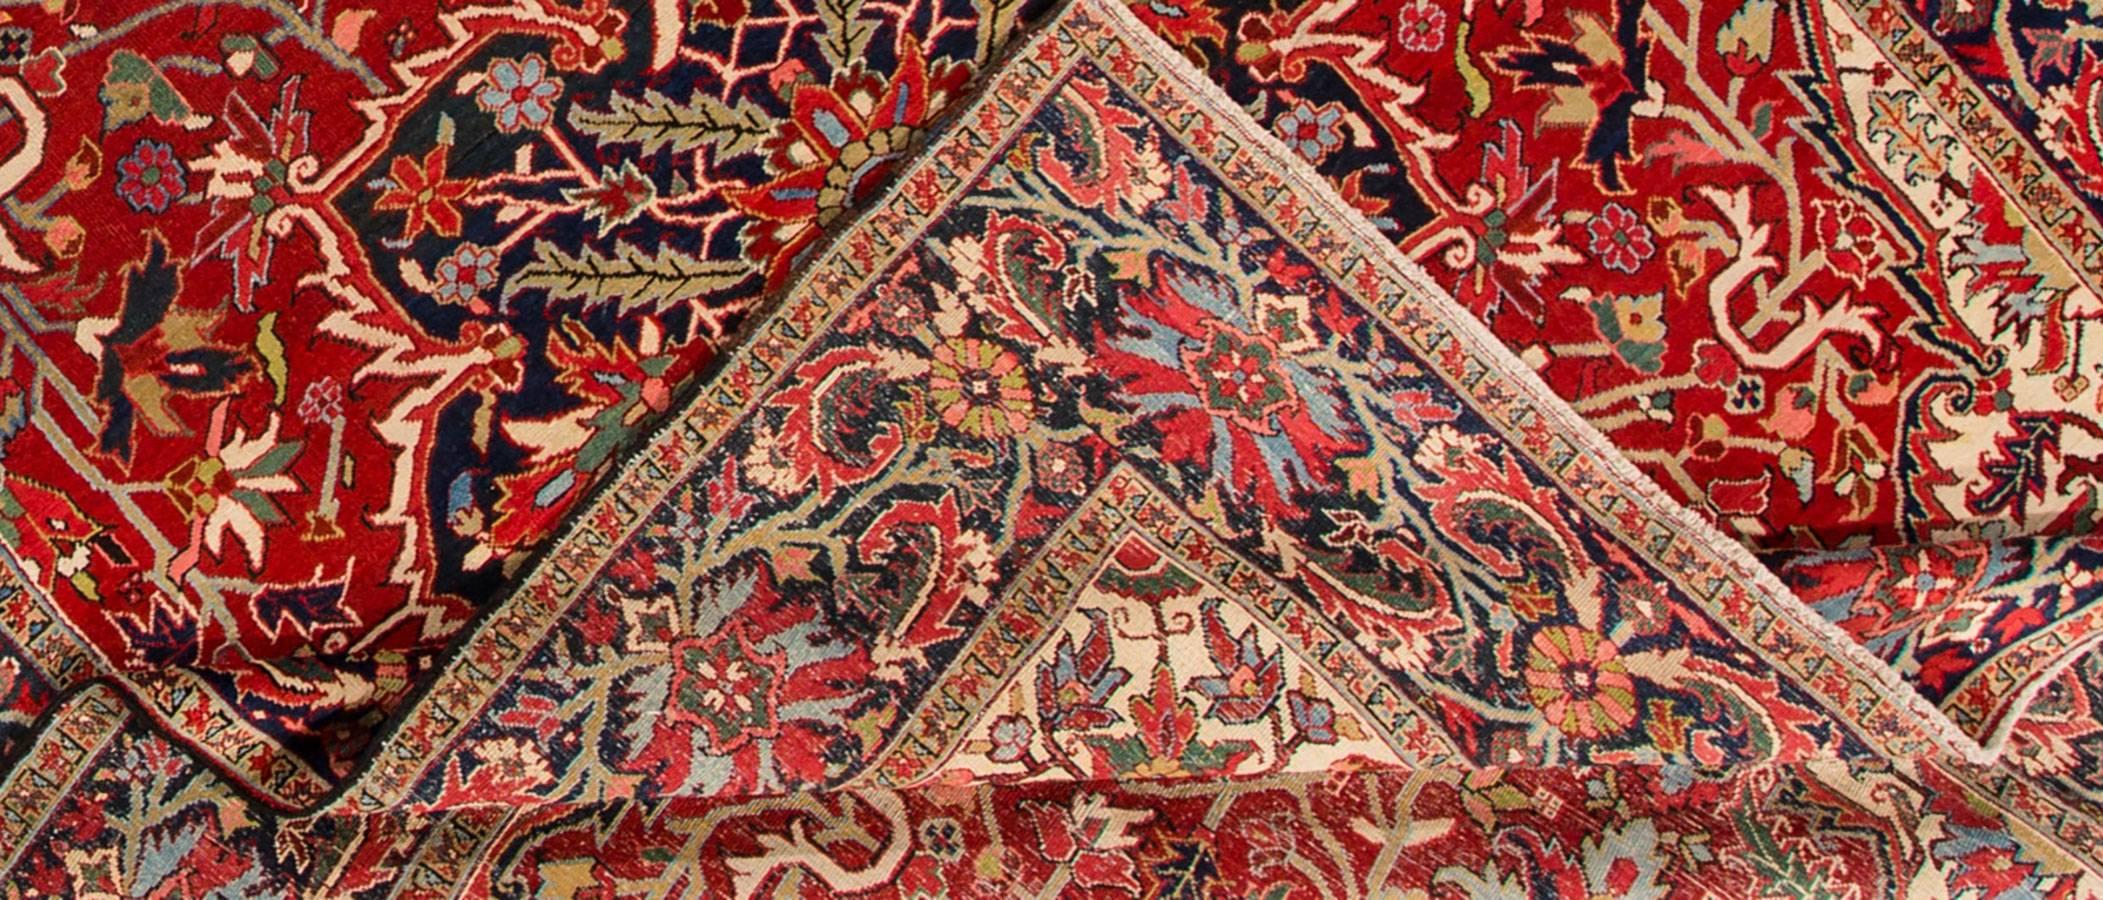 Antique Persian Heriz carpet with a rust or red field and blue-black medallion design with cream and lighter blue accents. Measures: 8.09 x 11.09.